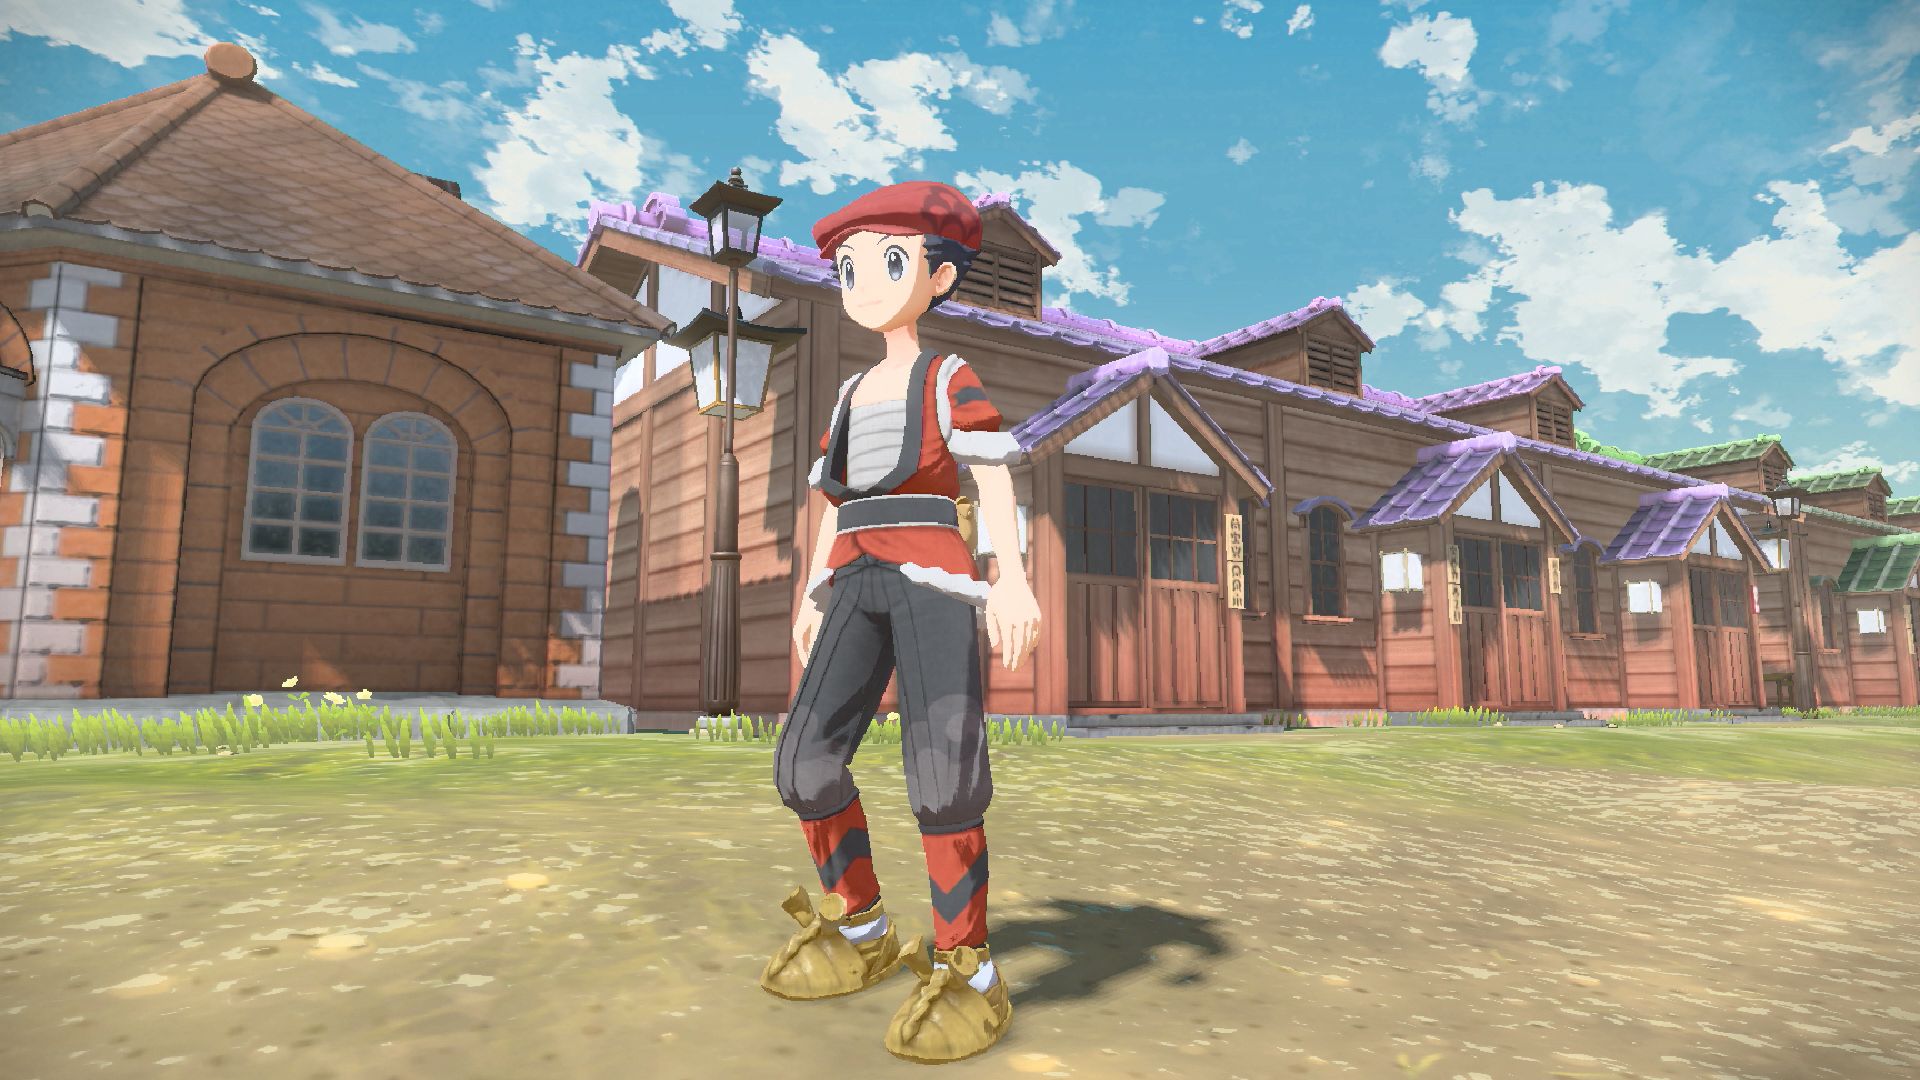 Screenshot of the male avatar in 'Pokémon Legends: Arceus' standing in Jubilife City